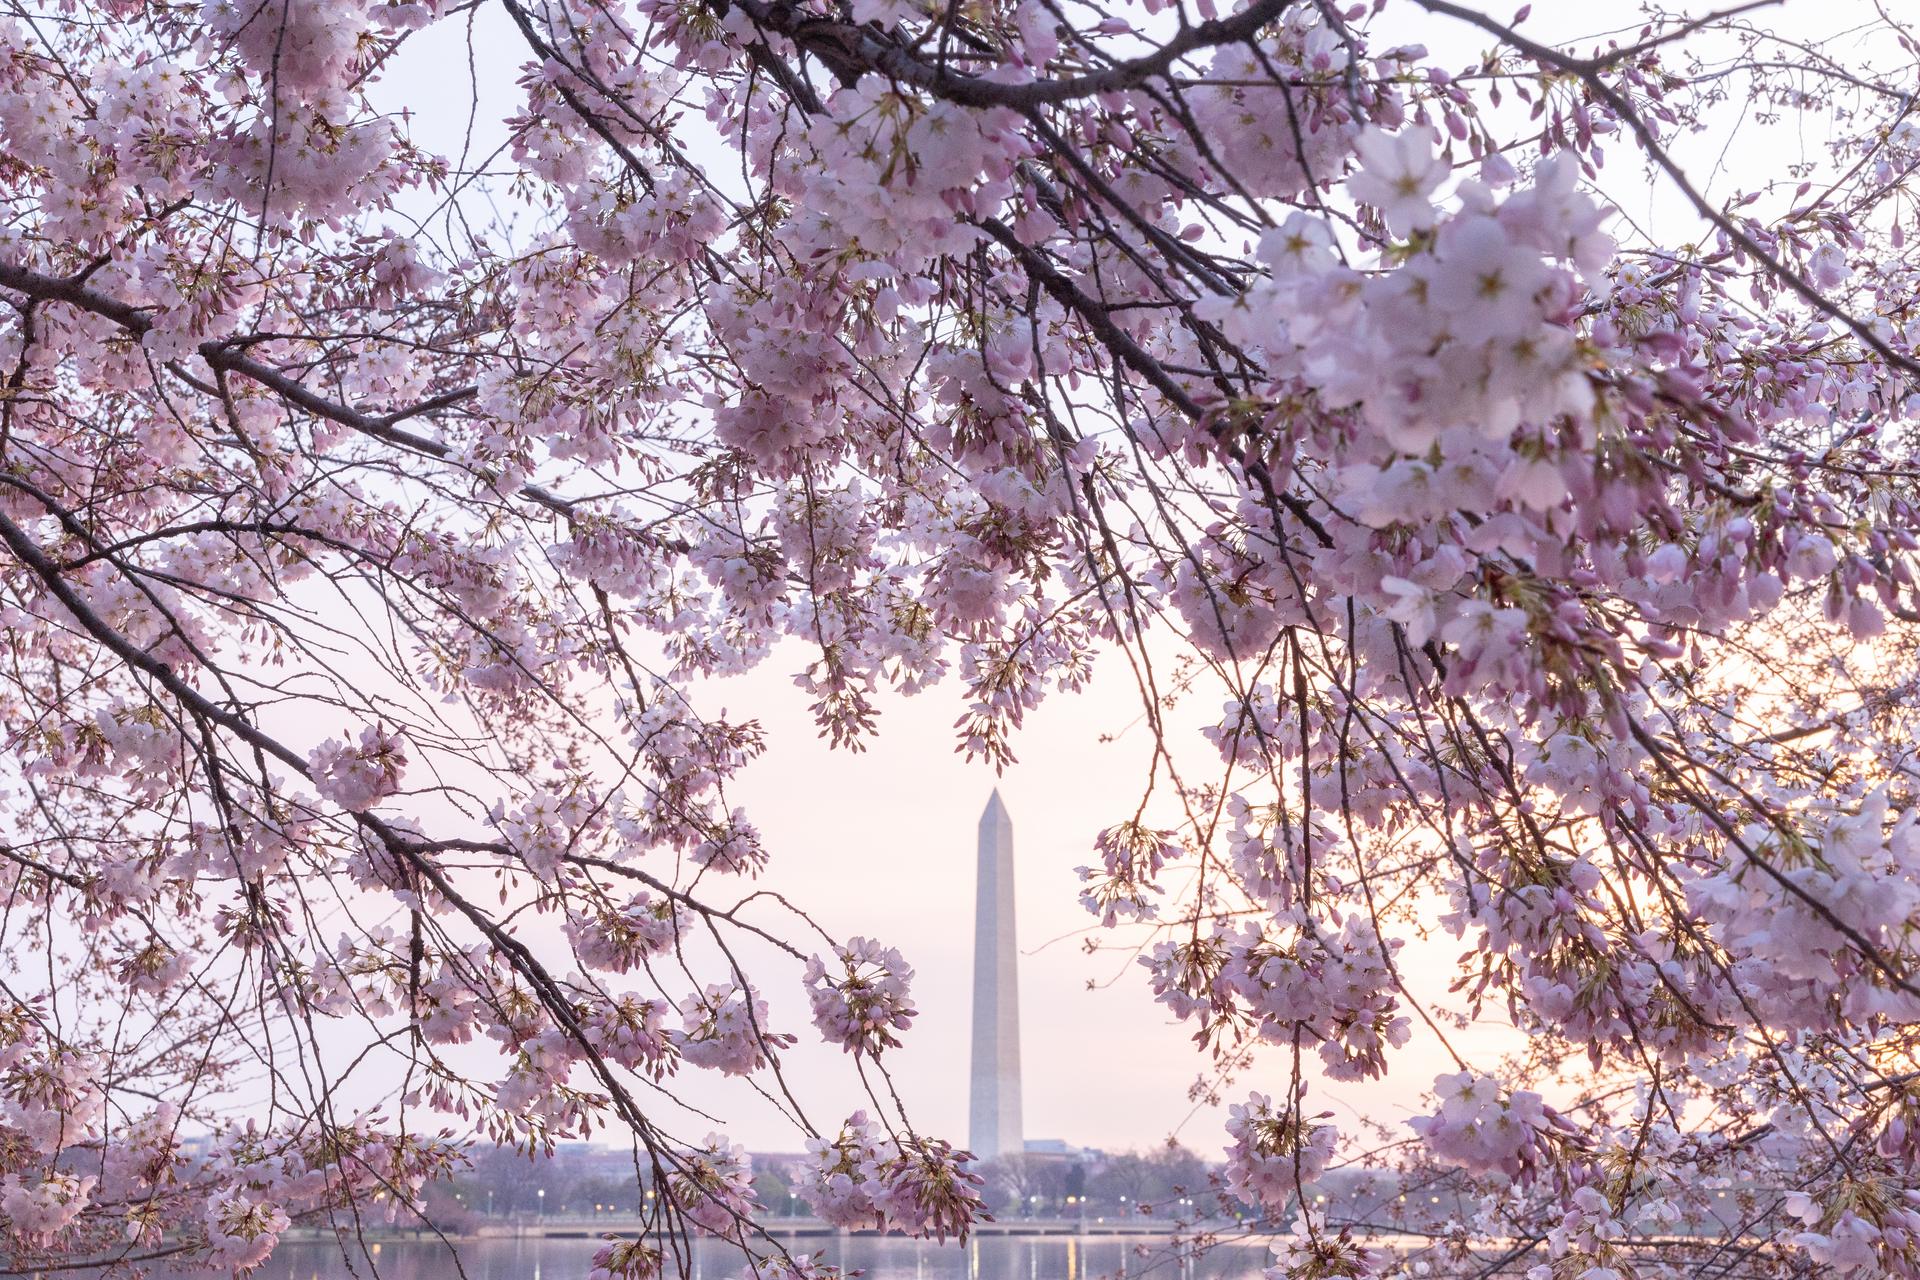 Cherry blossoms over the Washington Monument